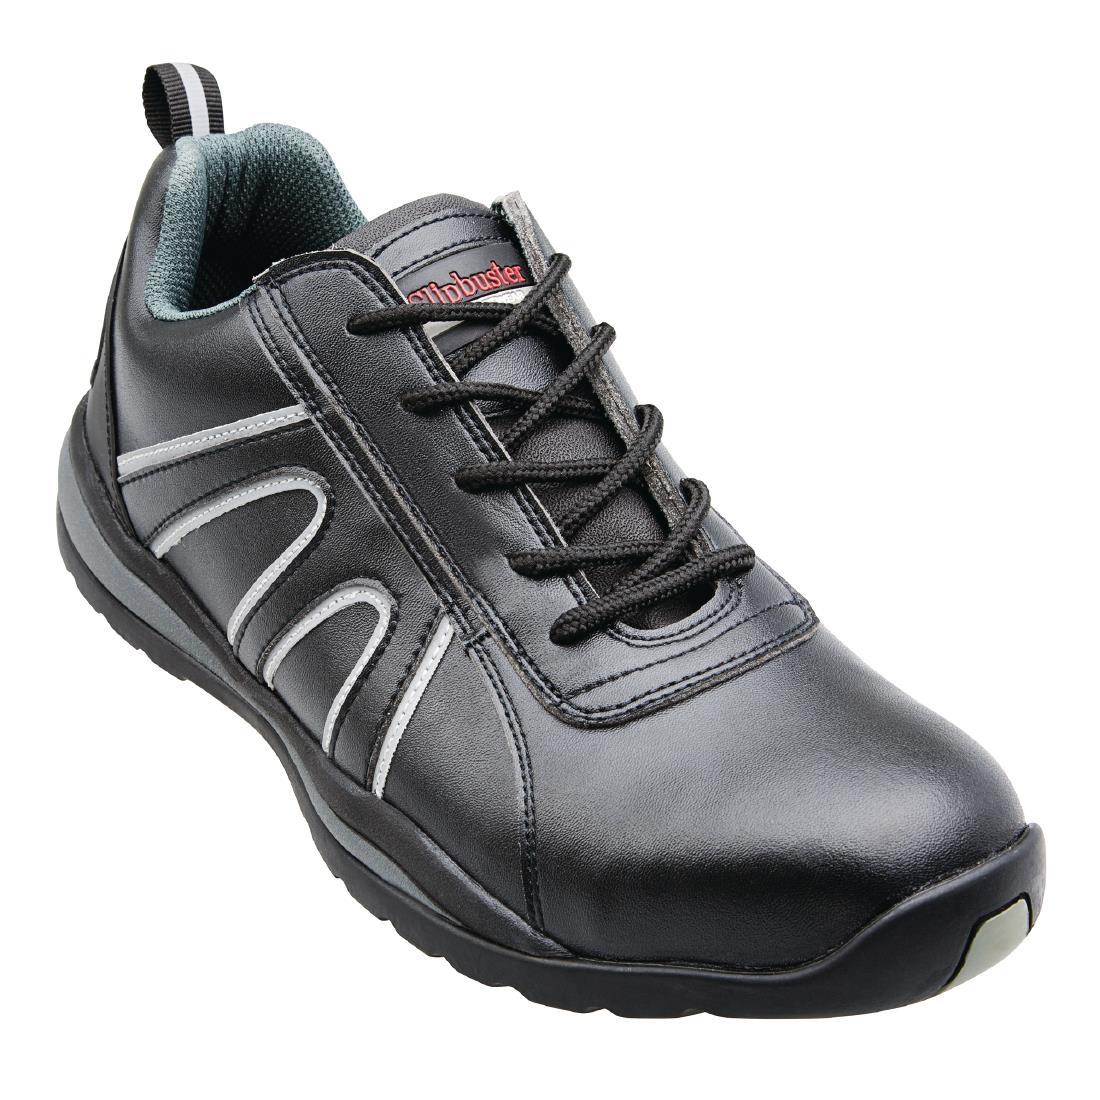 Slipbuster Safety Trainers Black 37 - A708-37  - 6